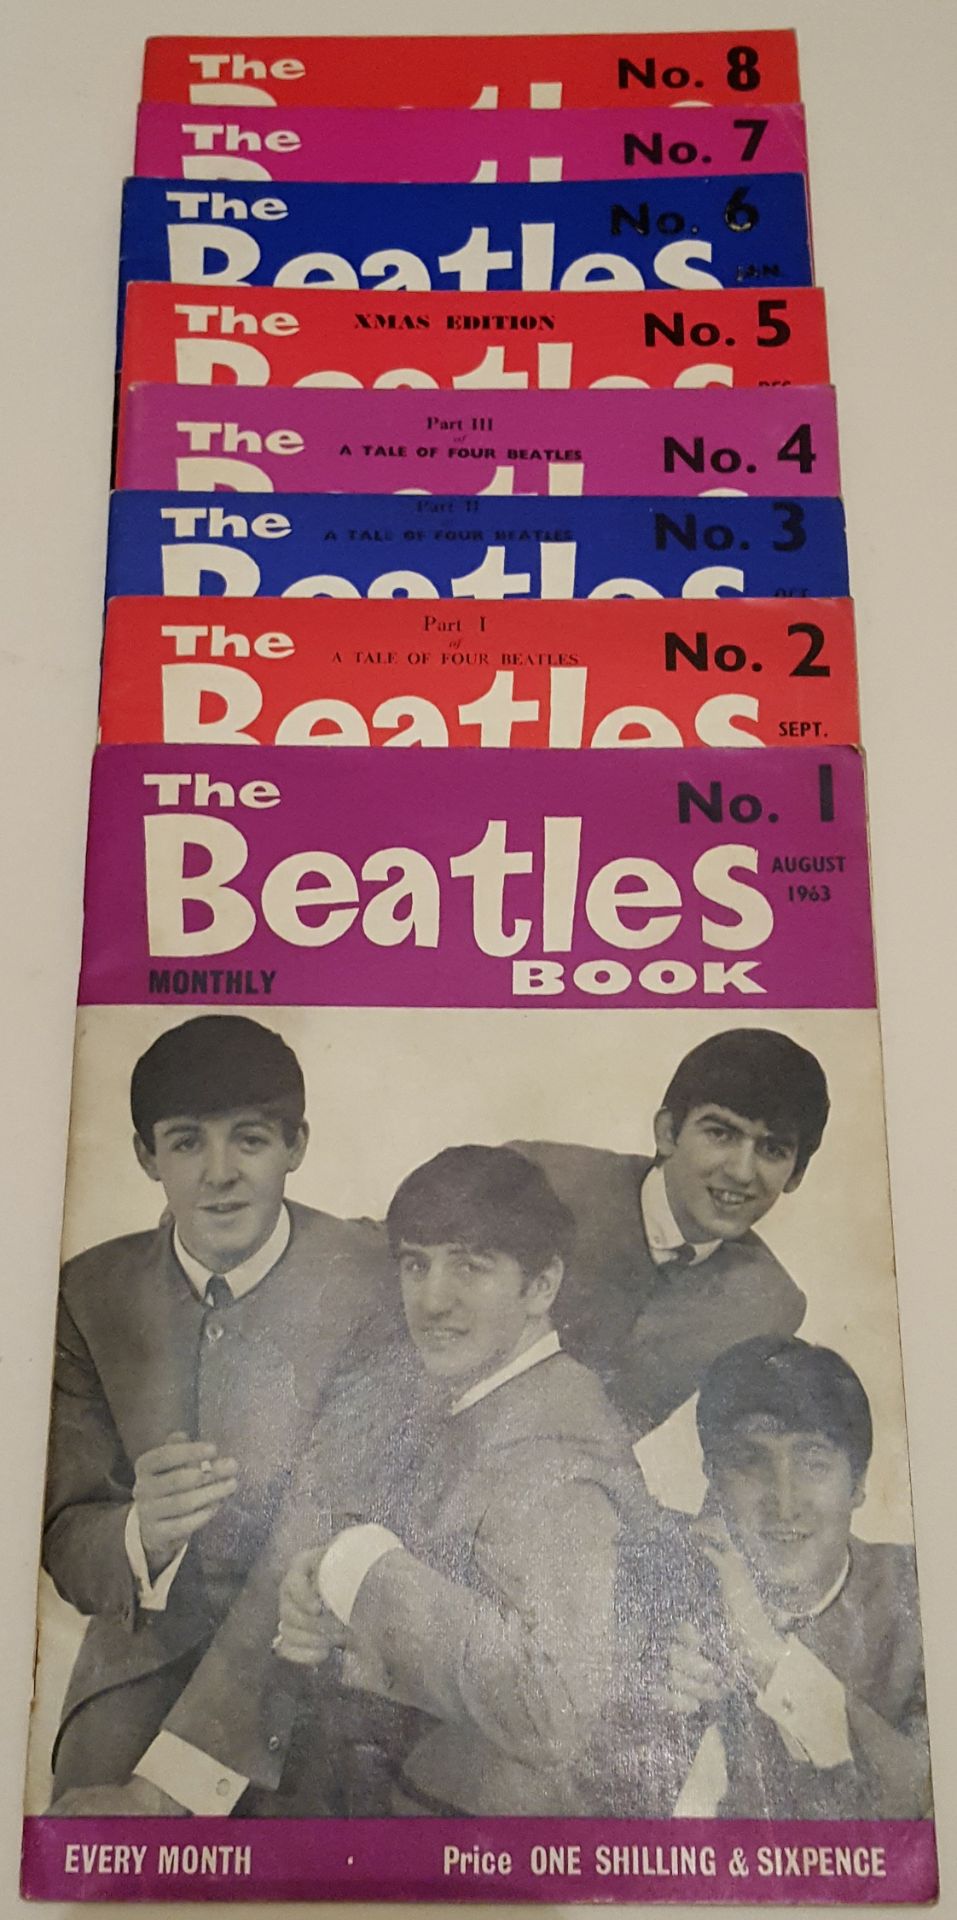 Vintage Retro The Beatles Book Monthly Issues 1 to 8 Aug 1963 - March 1964